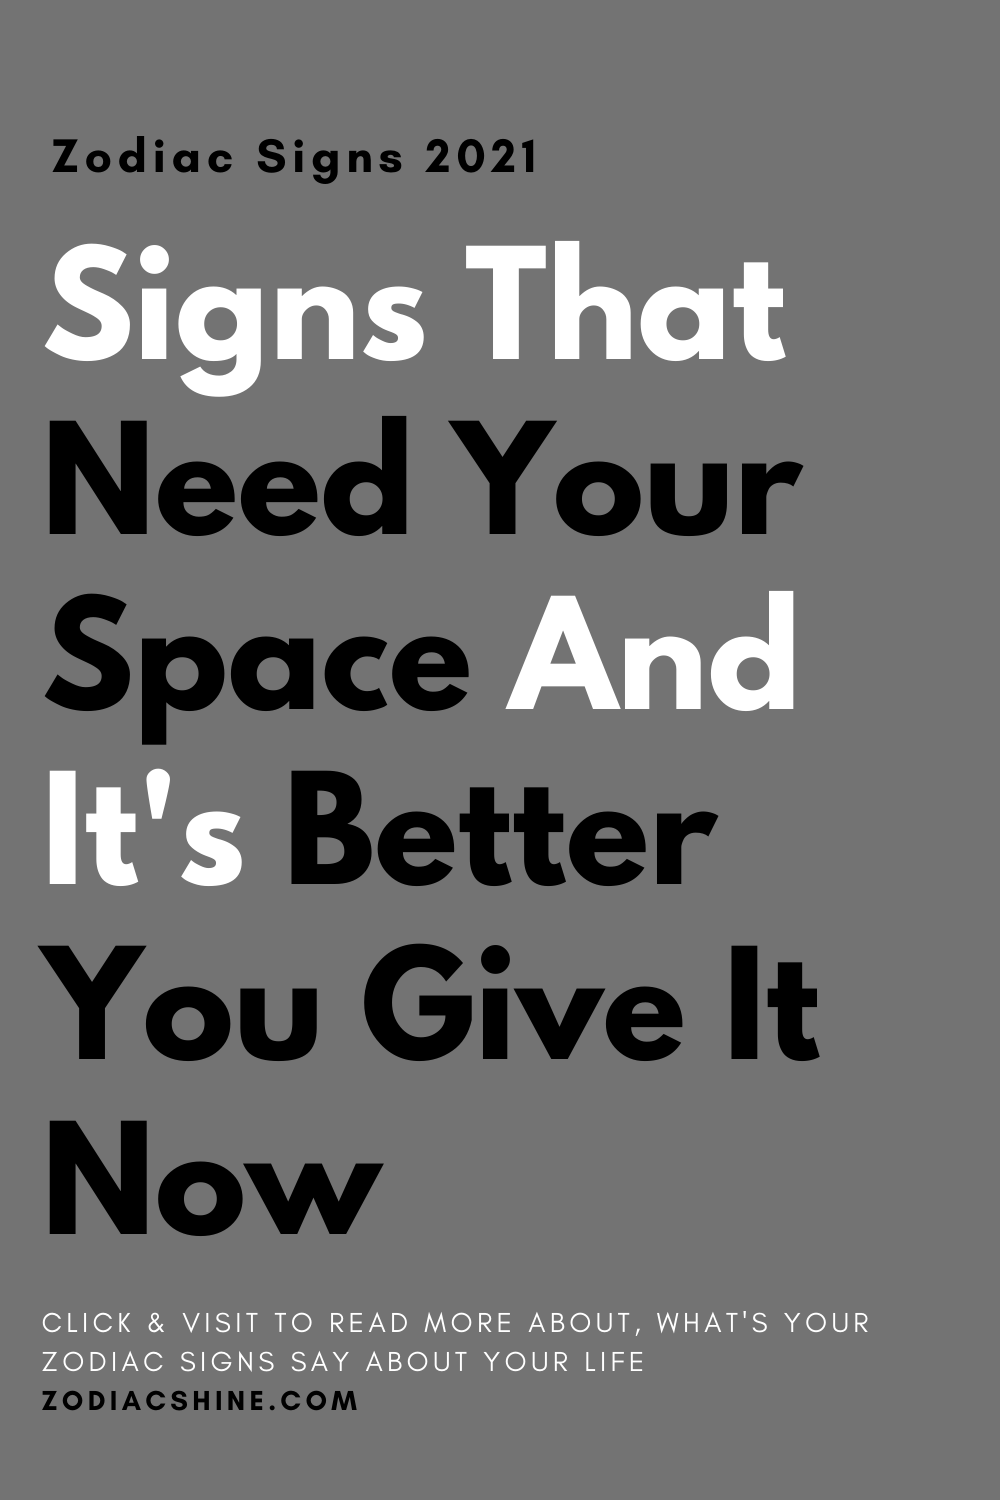 Signs That Need Your Space And It's Better You Give It Now